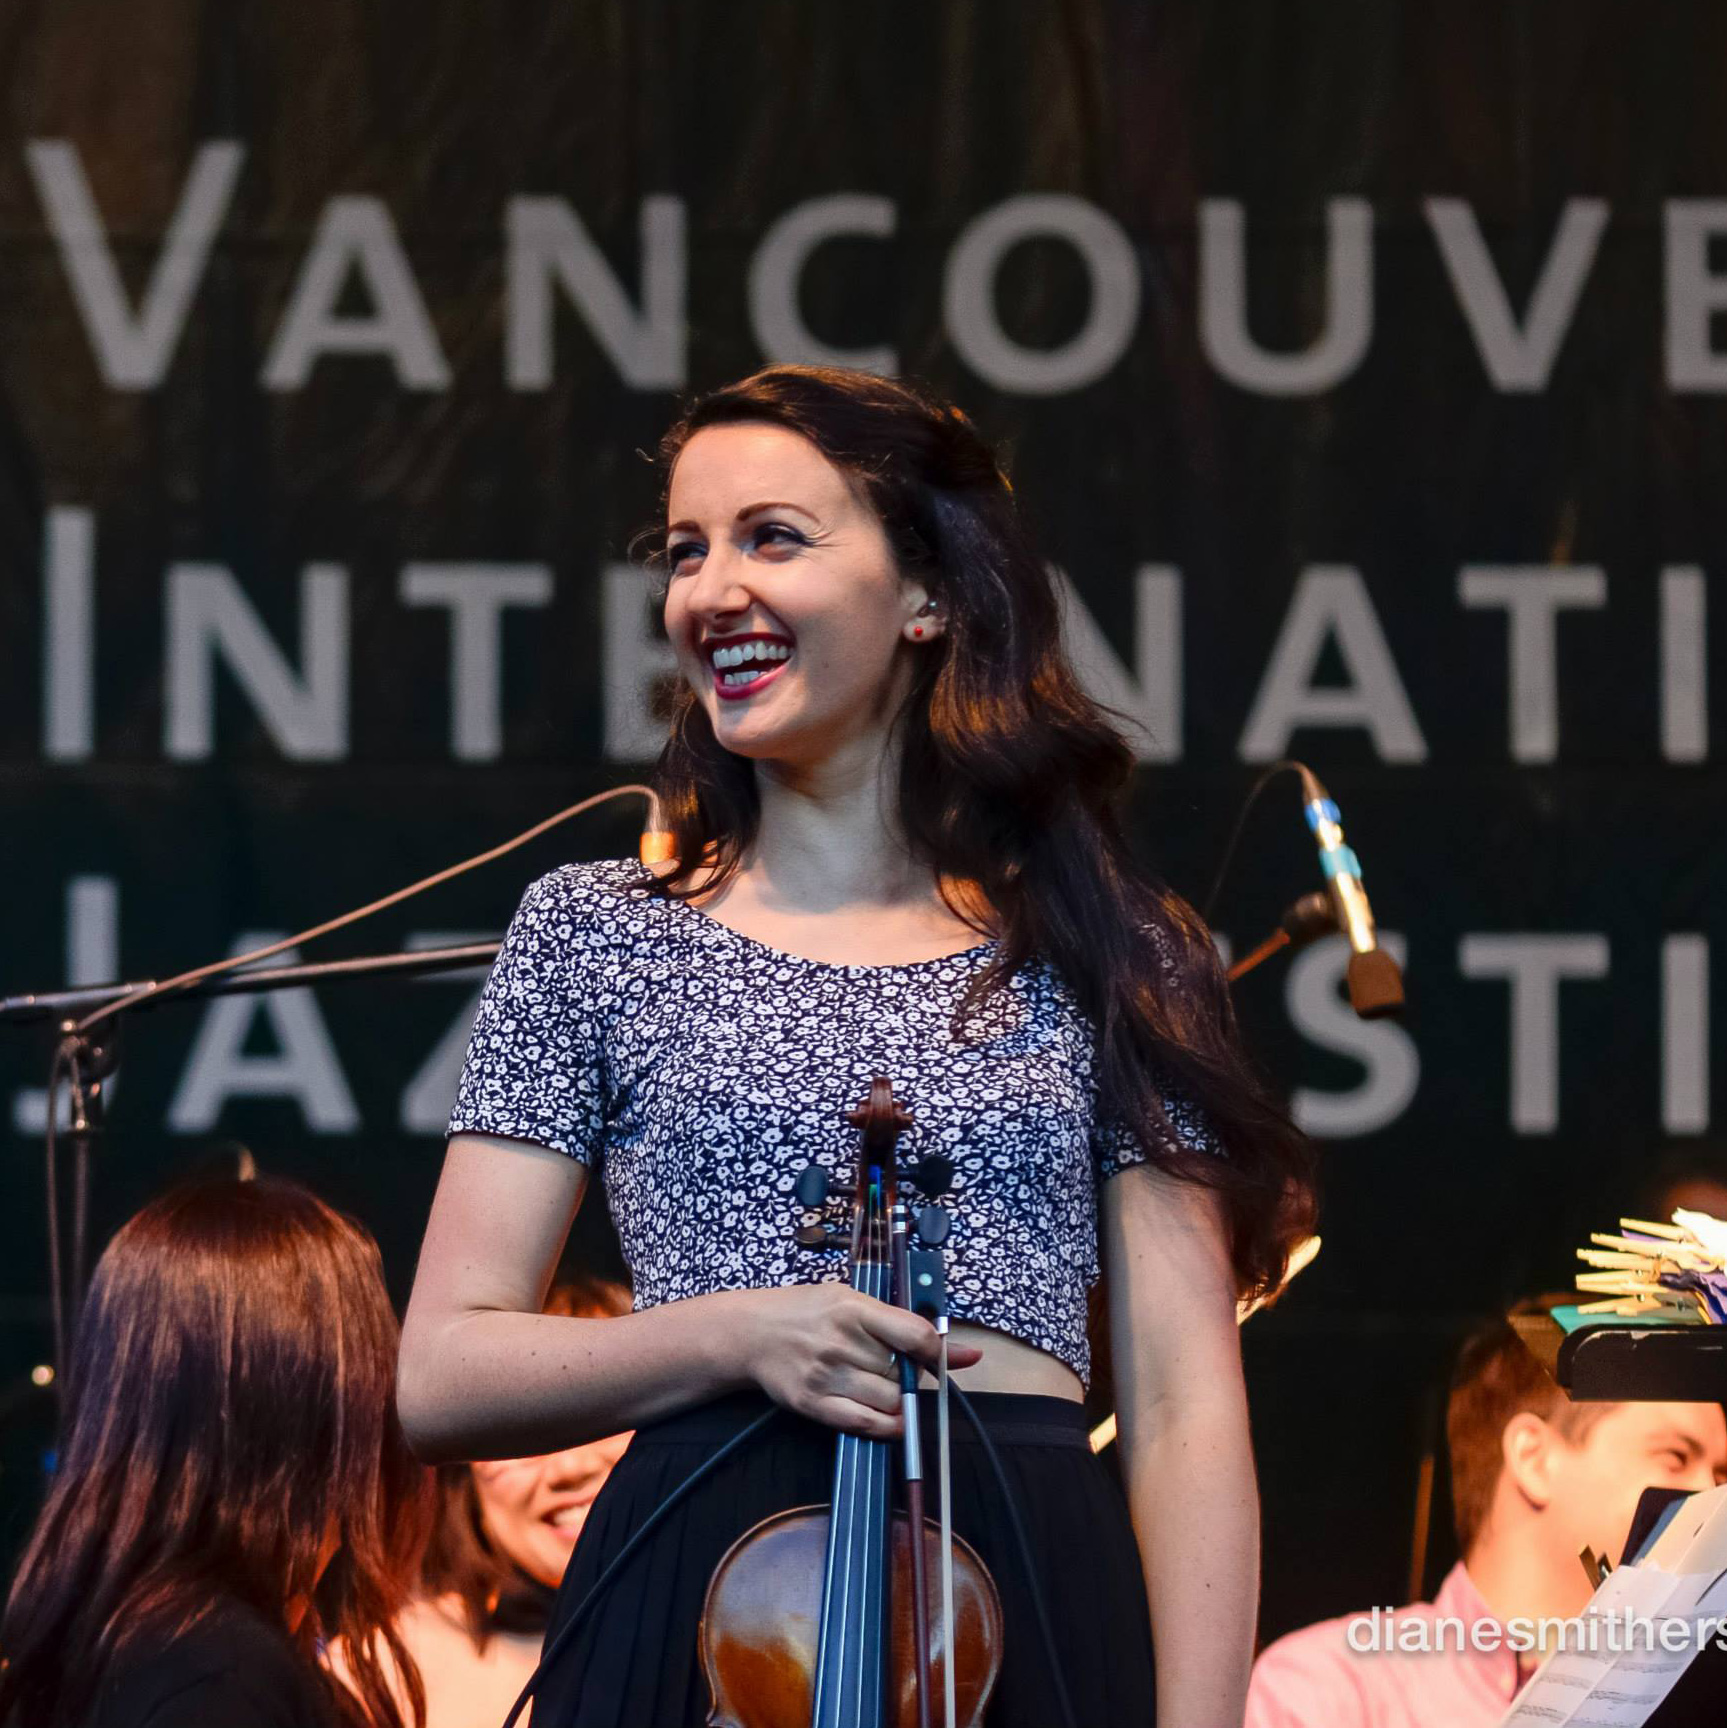 Elyse holding her violin and smiling on the stage of the Vancouver Jazz Festival